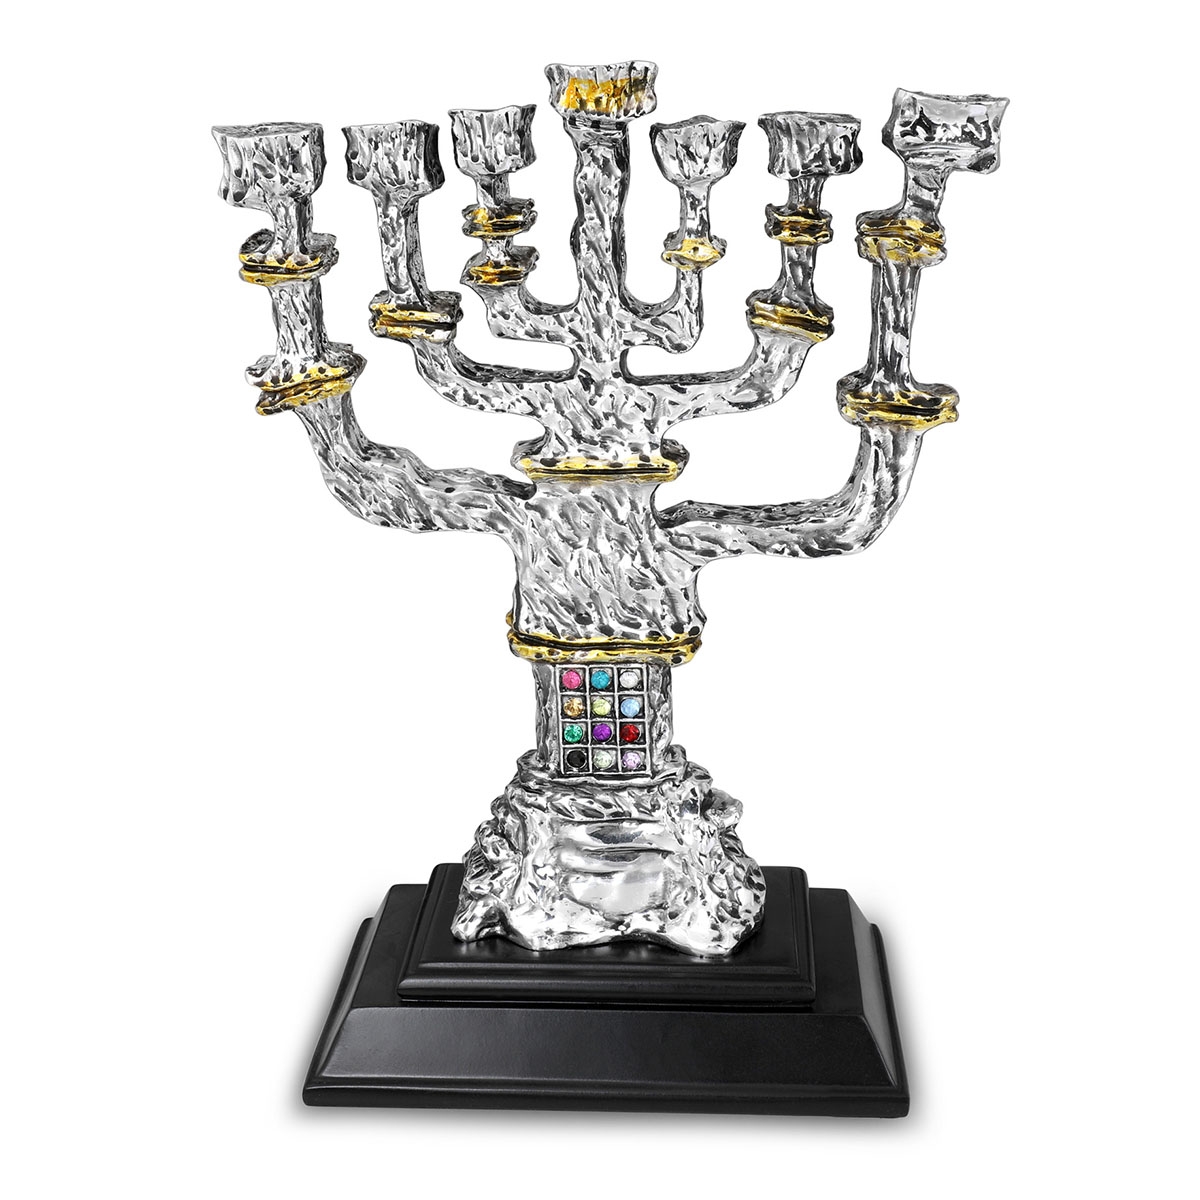 Deluxe Seven-Branched Menorah With Hoshen (12 Tribes of Israel) Design - 1